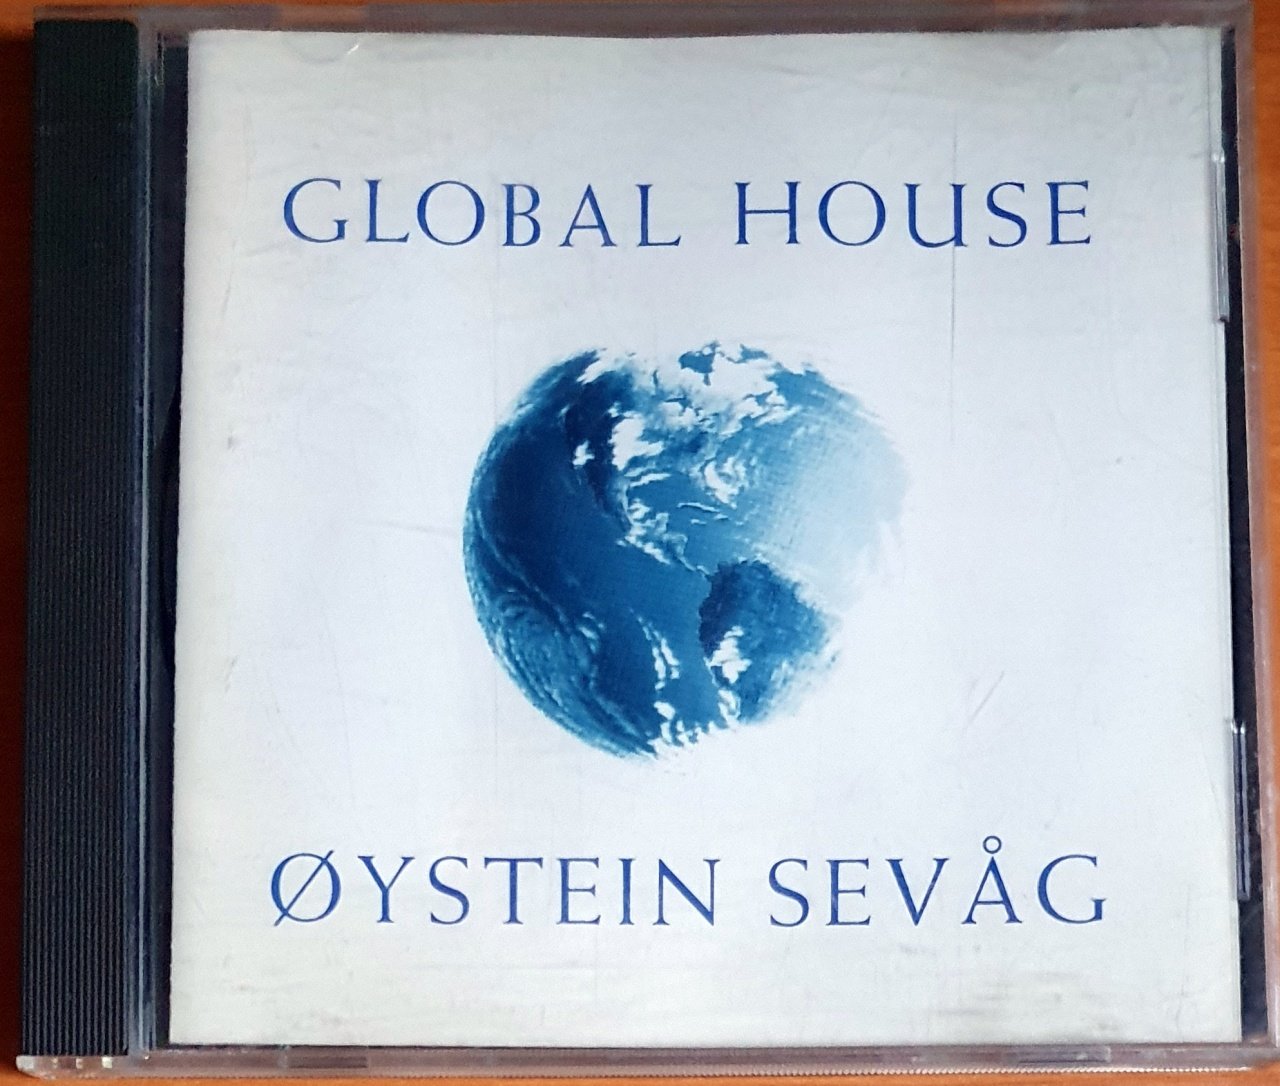 OYSTEIN SEVAG - GLOBAL HOUSE (1994) - CD WINDHAM HILL RECORDS 2.EL